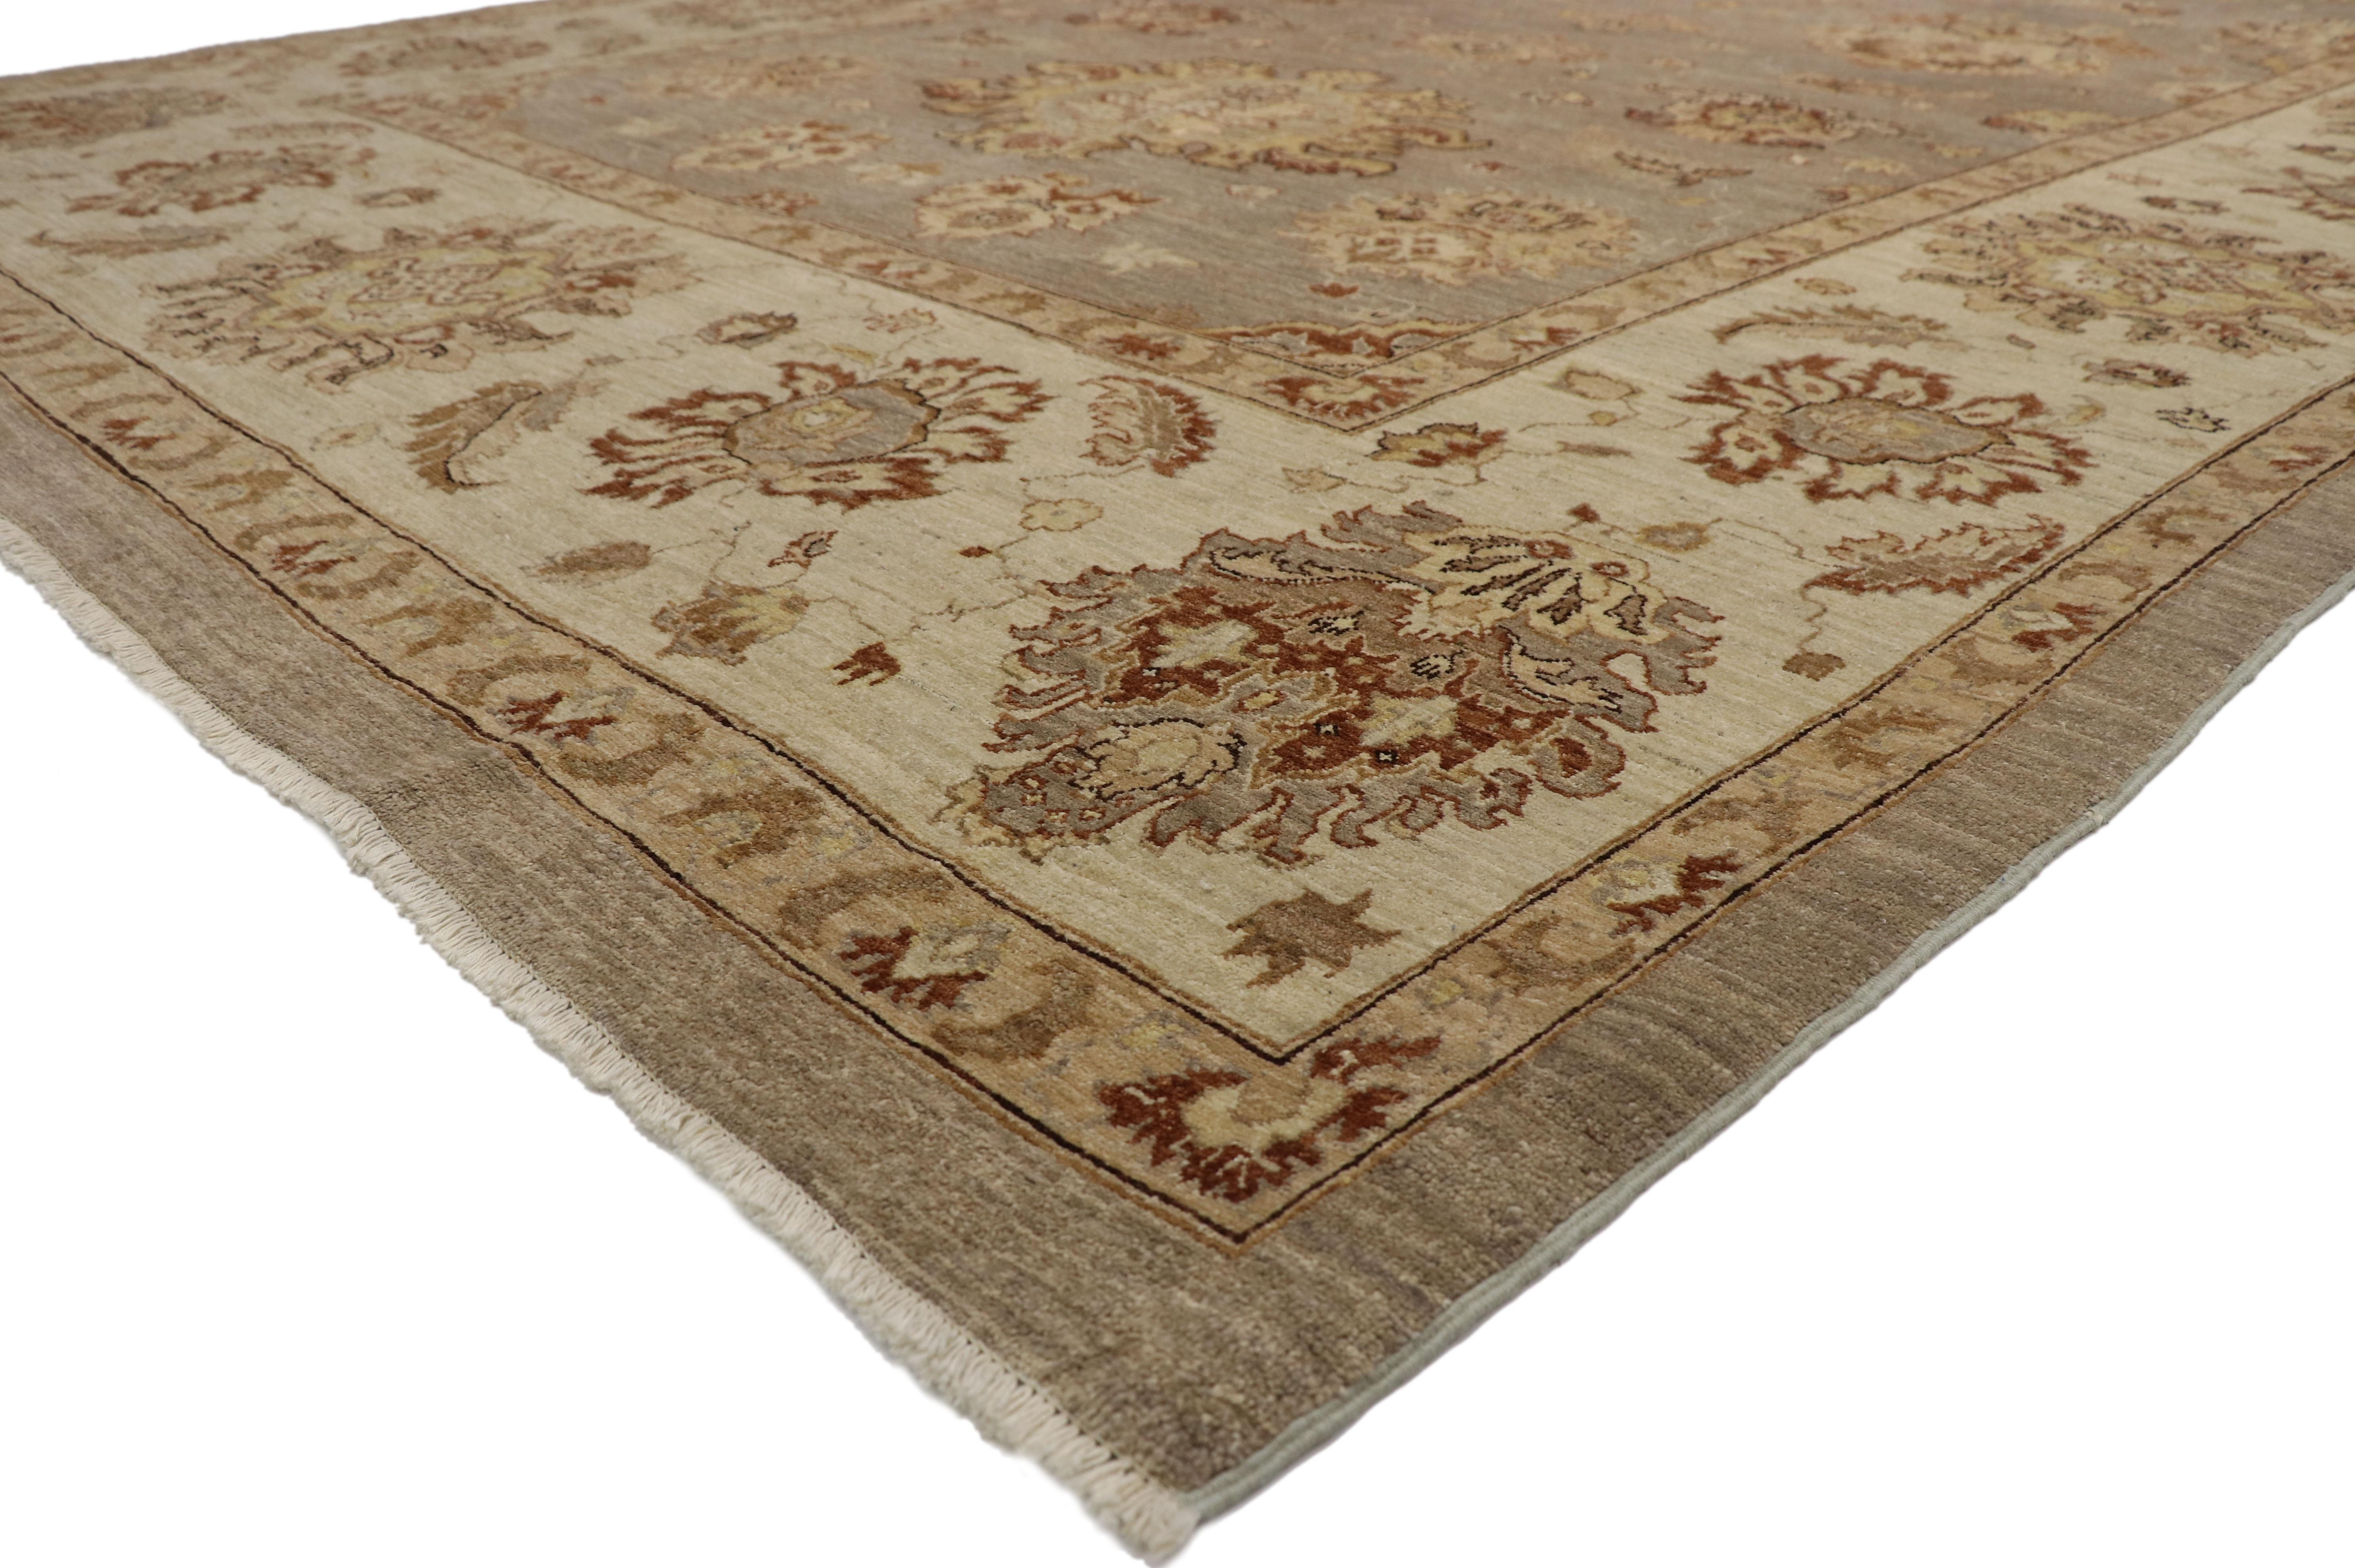 77348 New Oushak Transitional Area rug with William and Mary style. With its neutral color palette and curved lines, this hand knotted wool contemporary Turkish Oushak area rug beautifully embodies William and Mary style with a modern twist. It